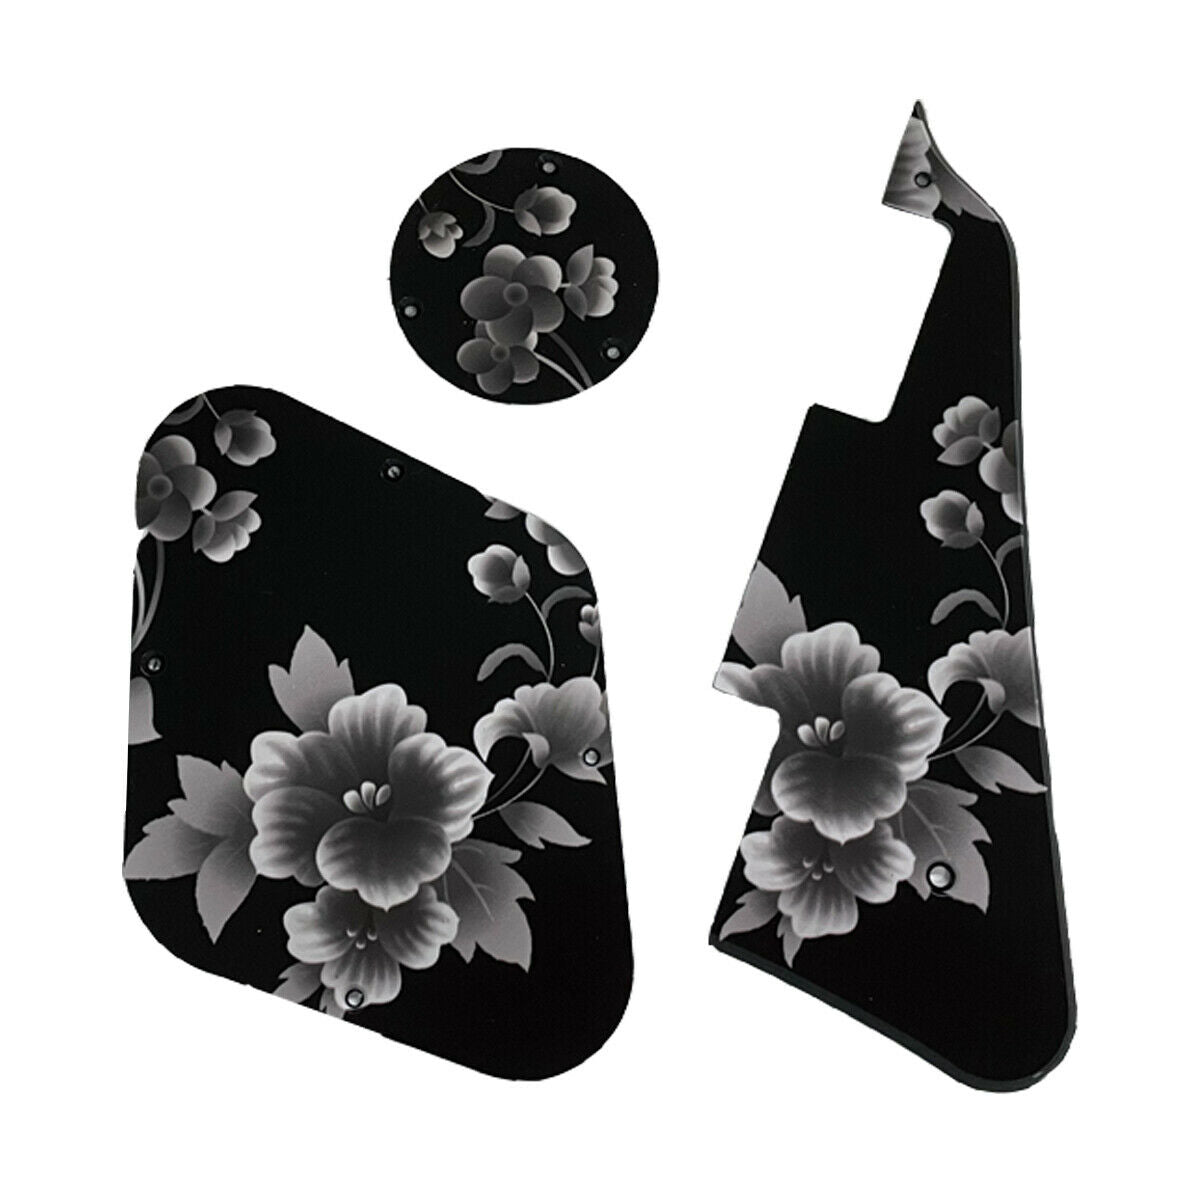 Flower Pattern LP Rear Control Plate Switch Cover Pickguard for Gibson Les Paul